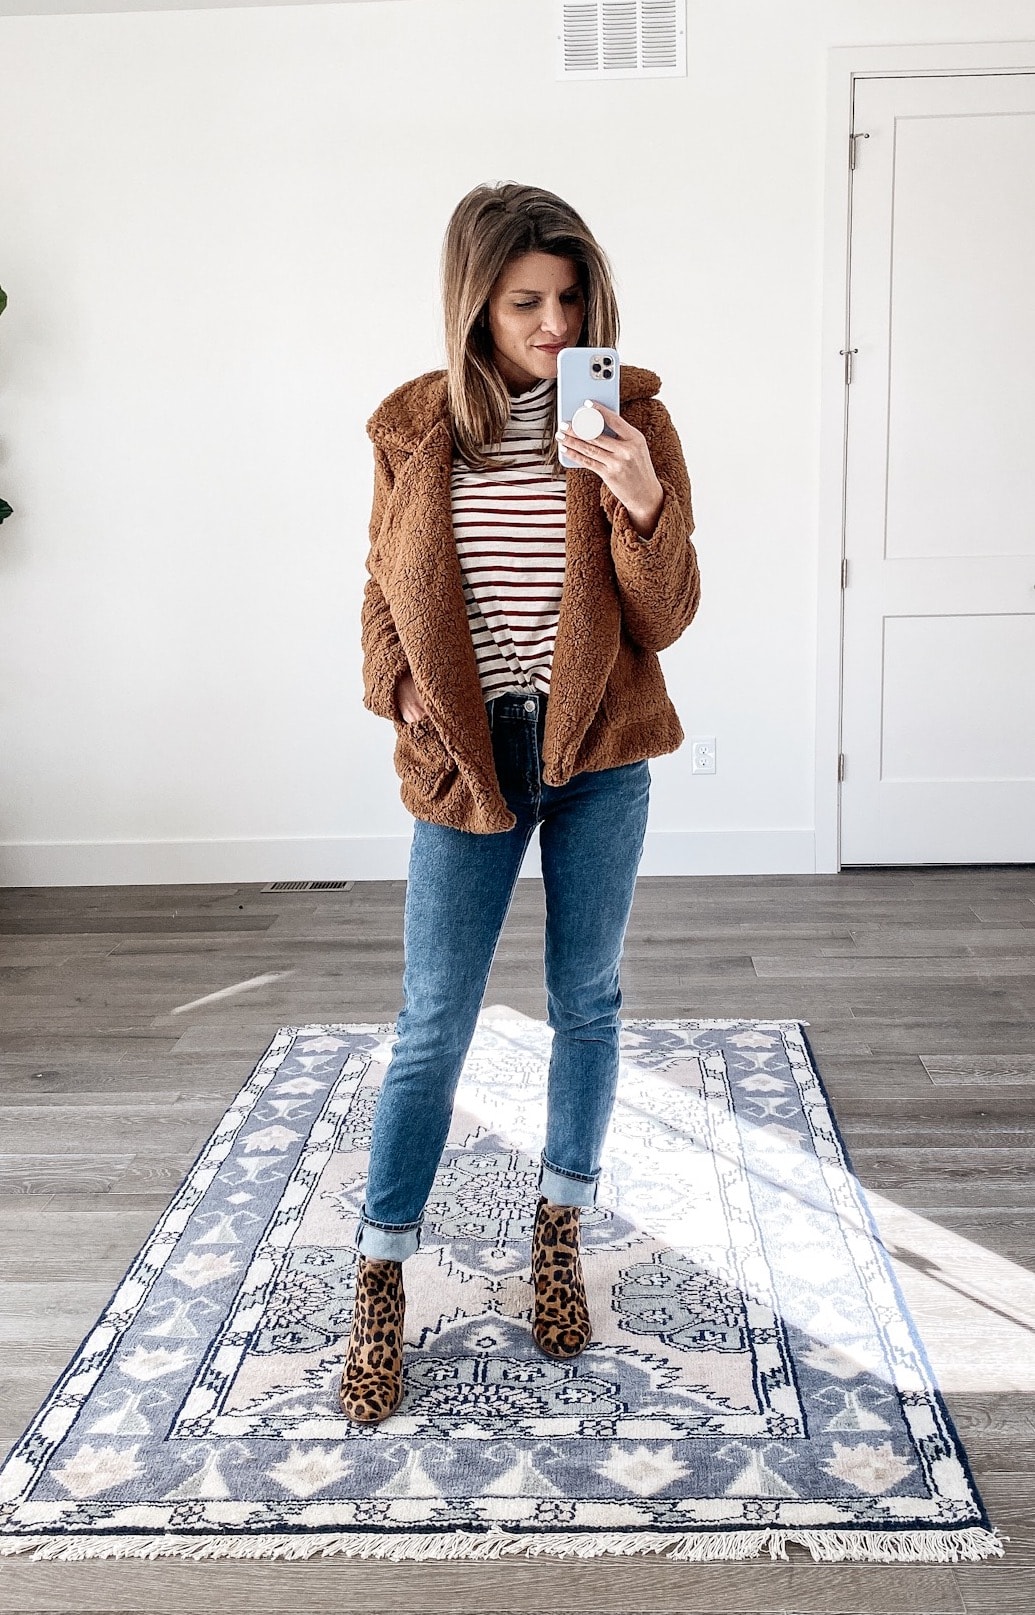 Brown Turtleneck with Jeans Outfits For Women (7 ideas & outfits